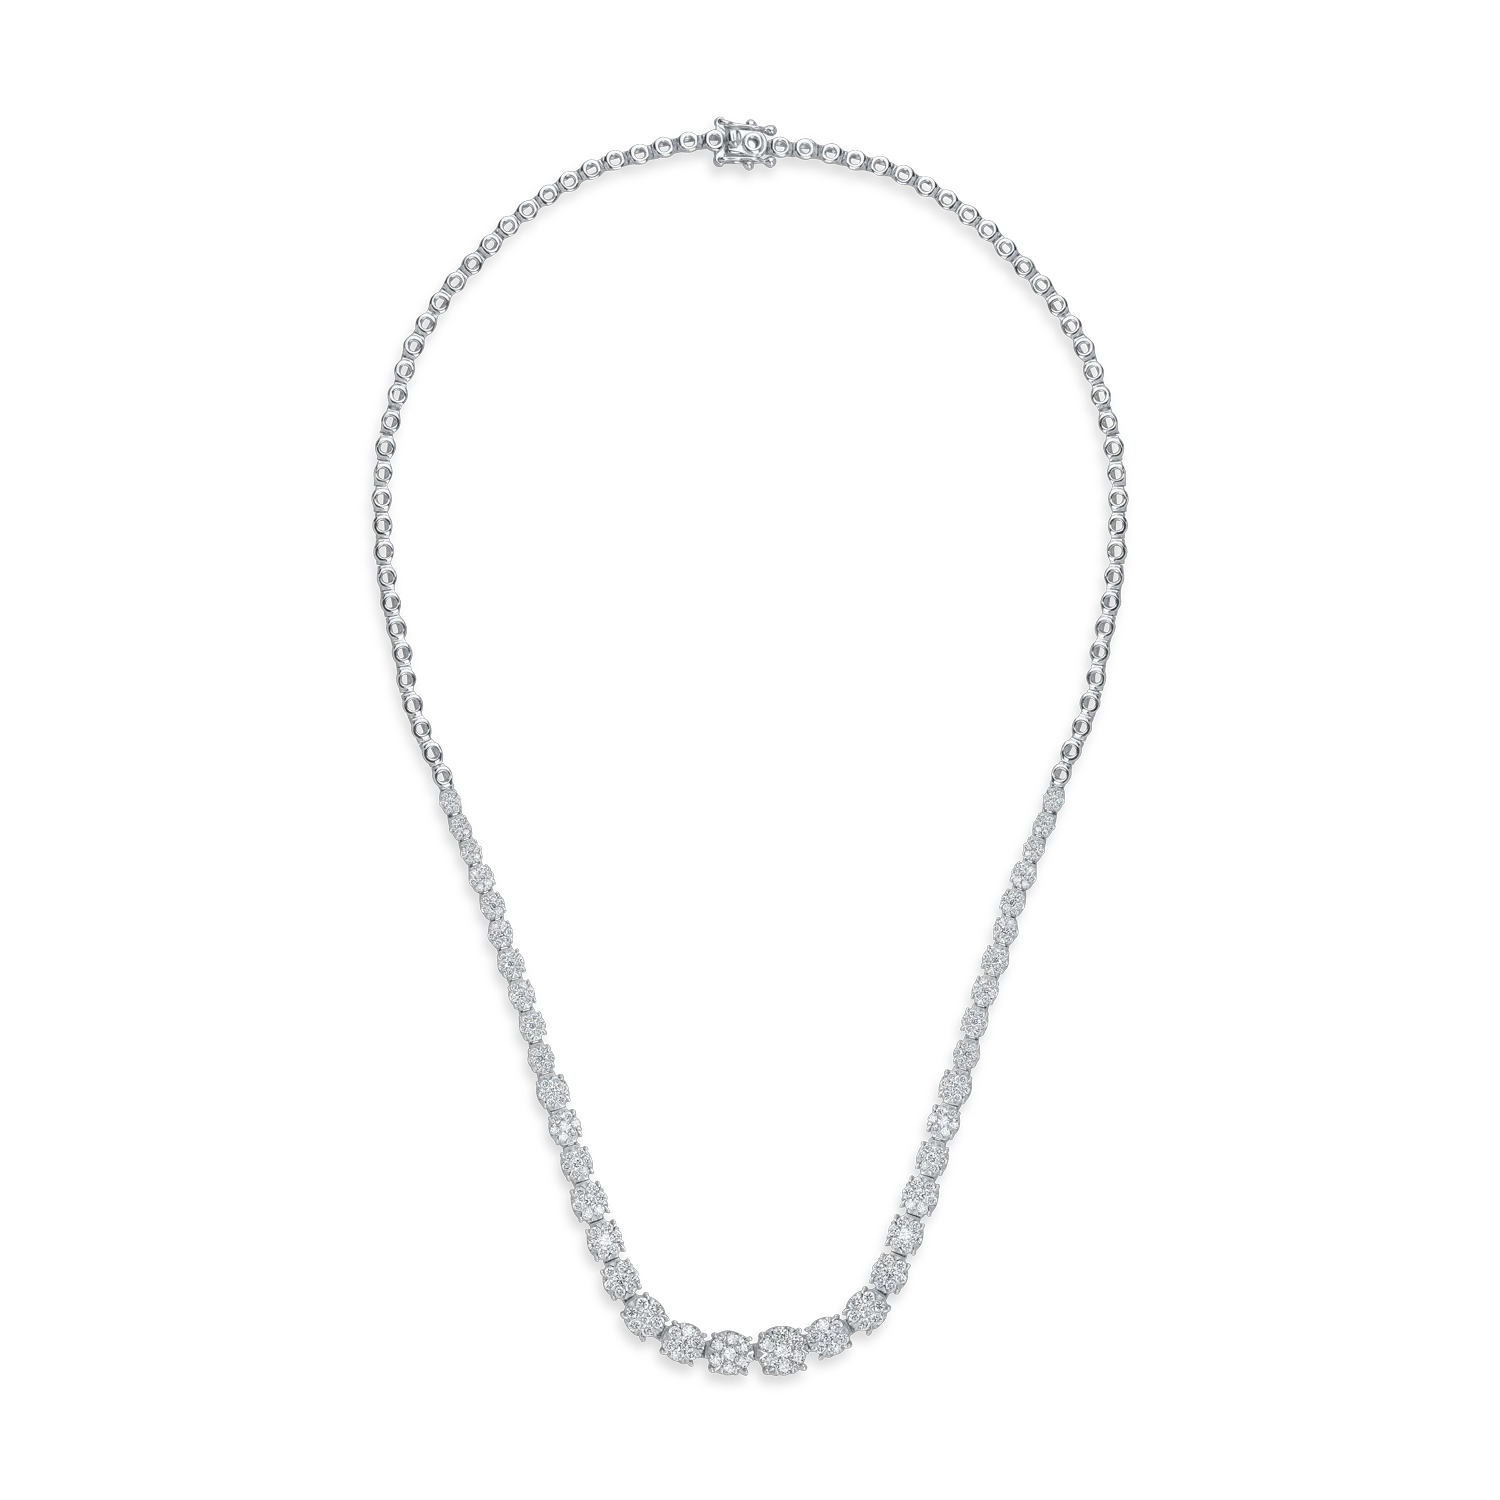 18K white gold necklace with 4ct diamonds